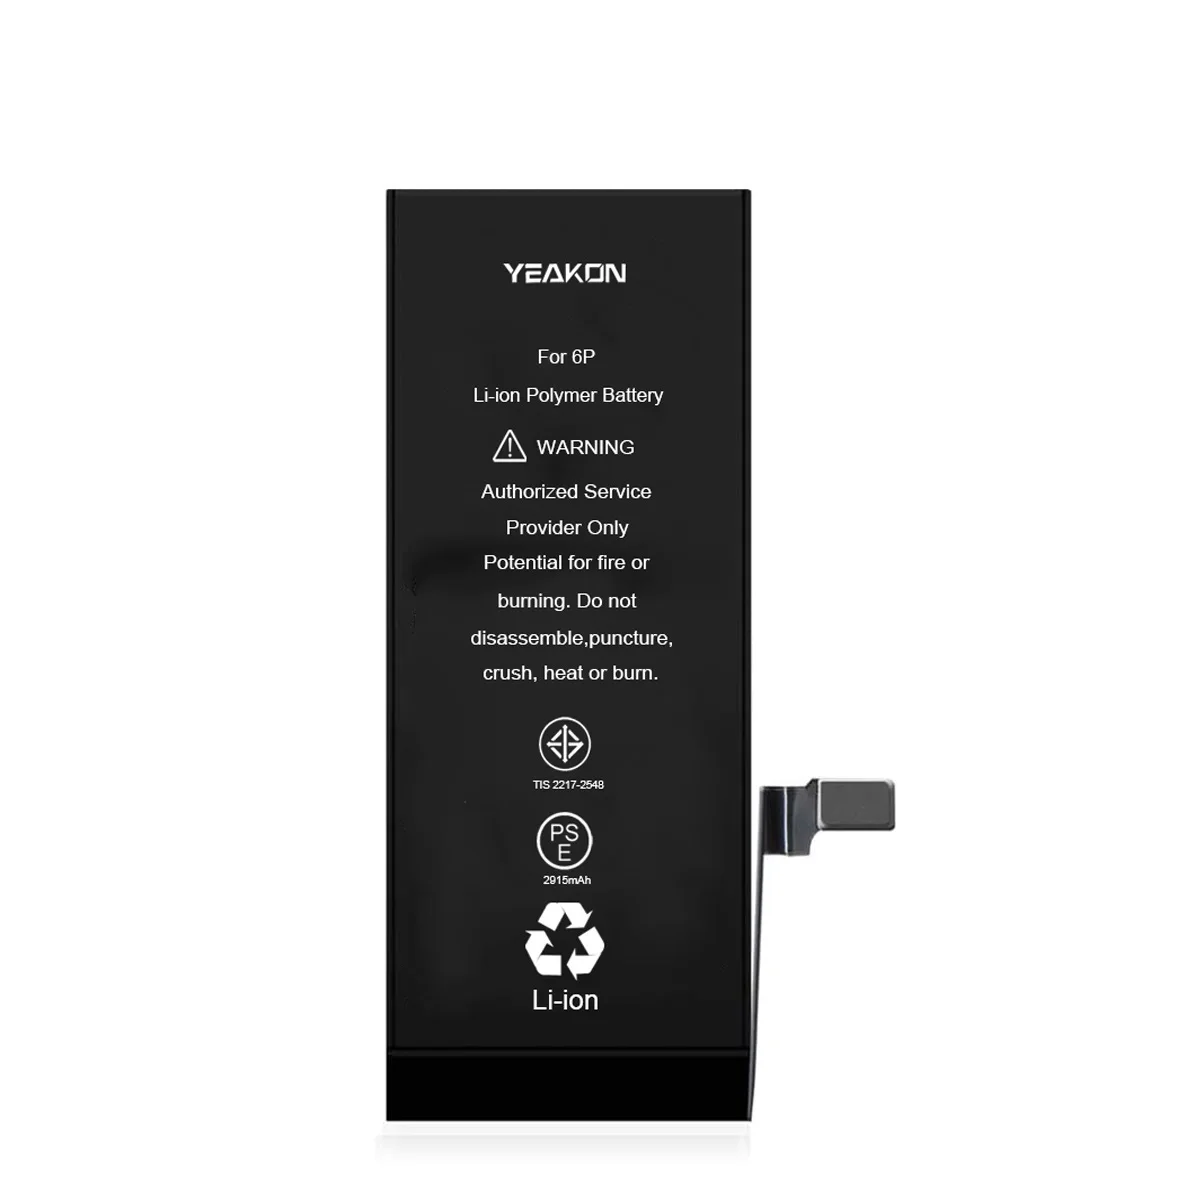 

YEAKON 6 Plus Battery Replacement For iPhone 5 5S 5C SE 6 6S 6P 6SP 7 7G 7P 8 8G 8P Plus X XS MAX XR 11 12 13 Pro MAX Batteries